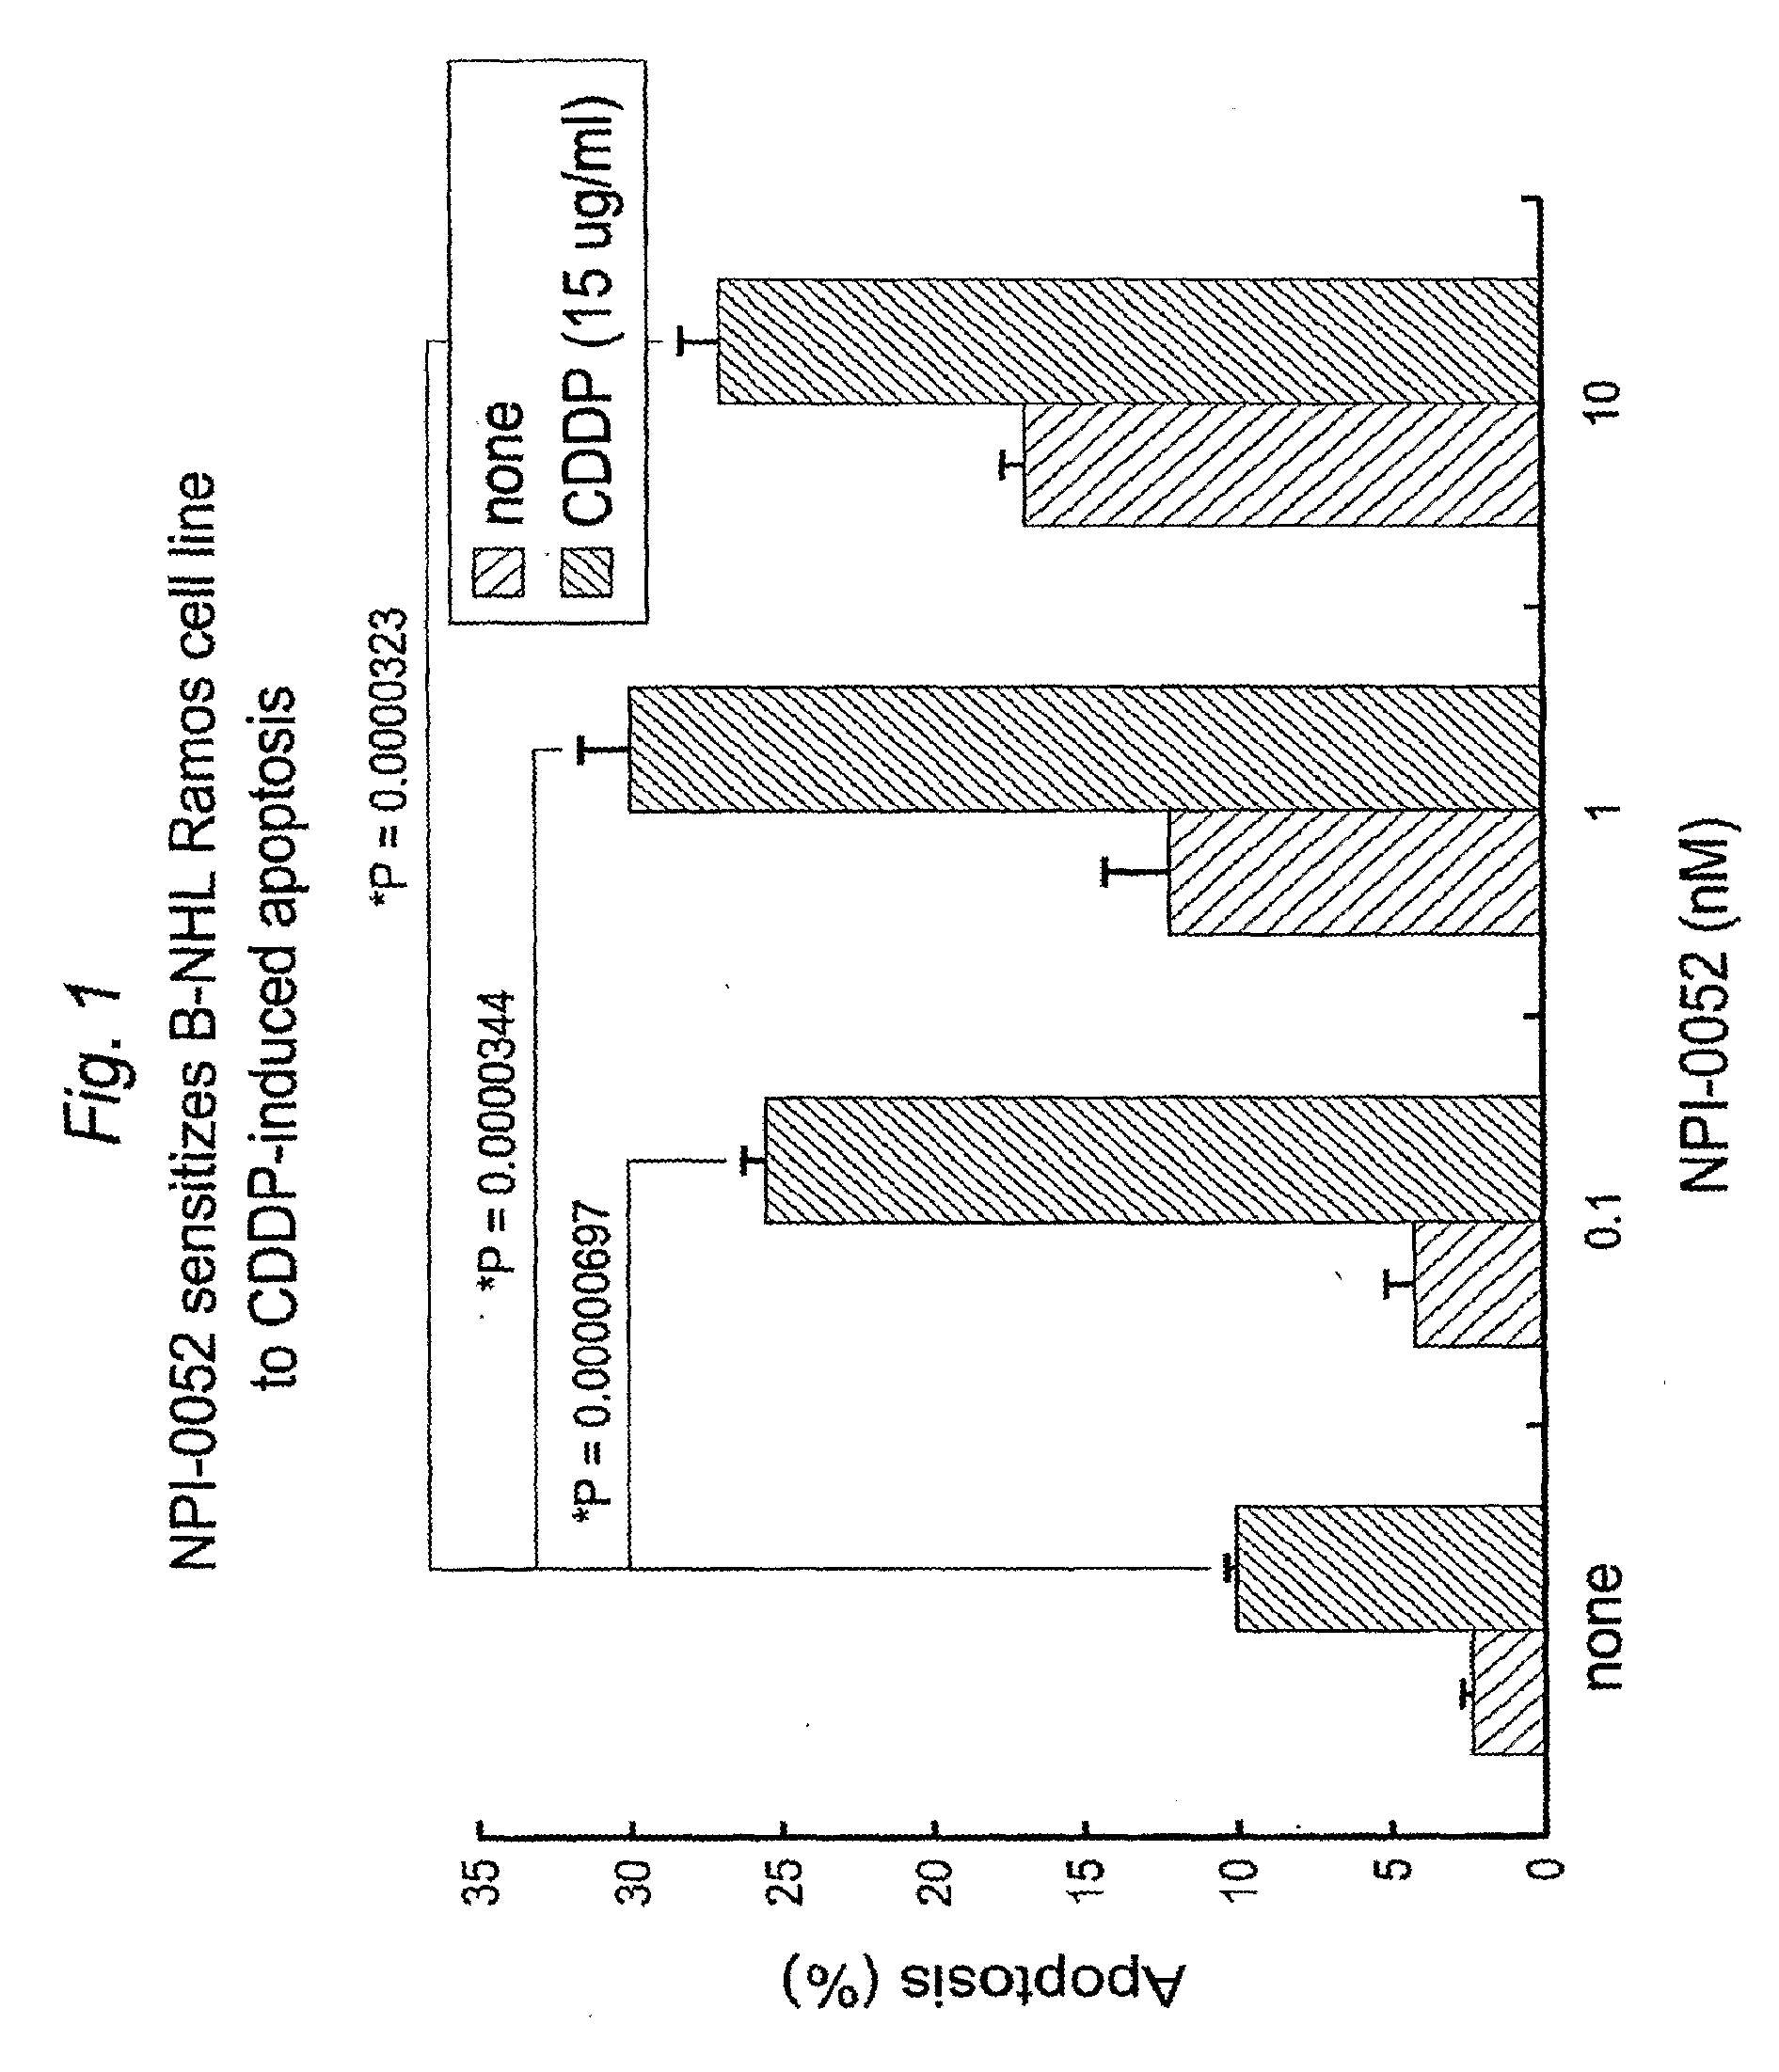 Methods of sensitizing cancer to therapy-induced cytotoxicity